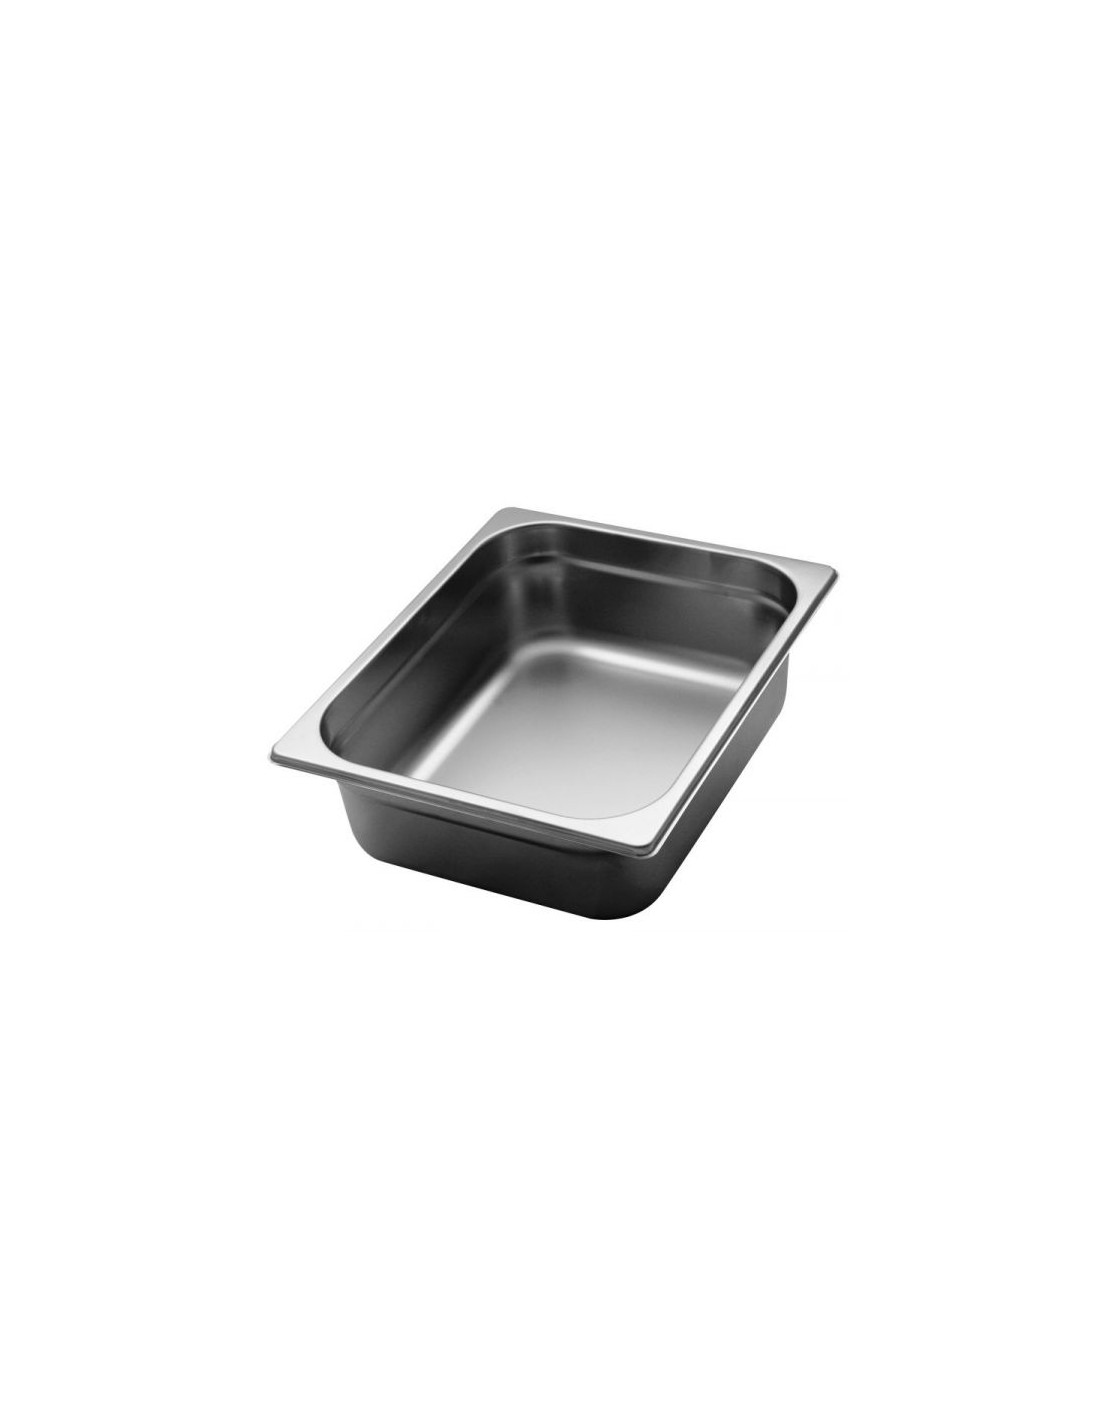 Stainless steel gastronorm containers 1/2 H. 10 cm - Capacity 8 liters - Dimensions 32.5 x 26.5 cm